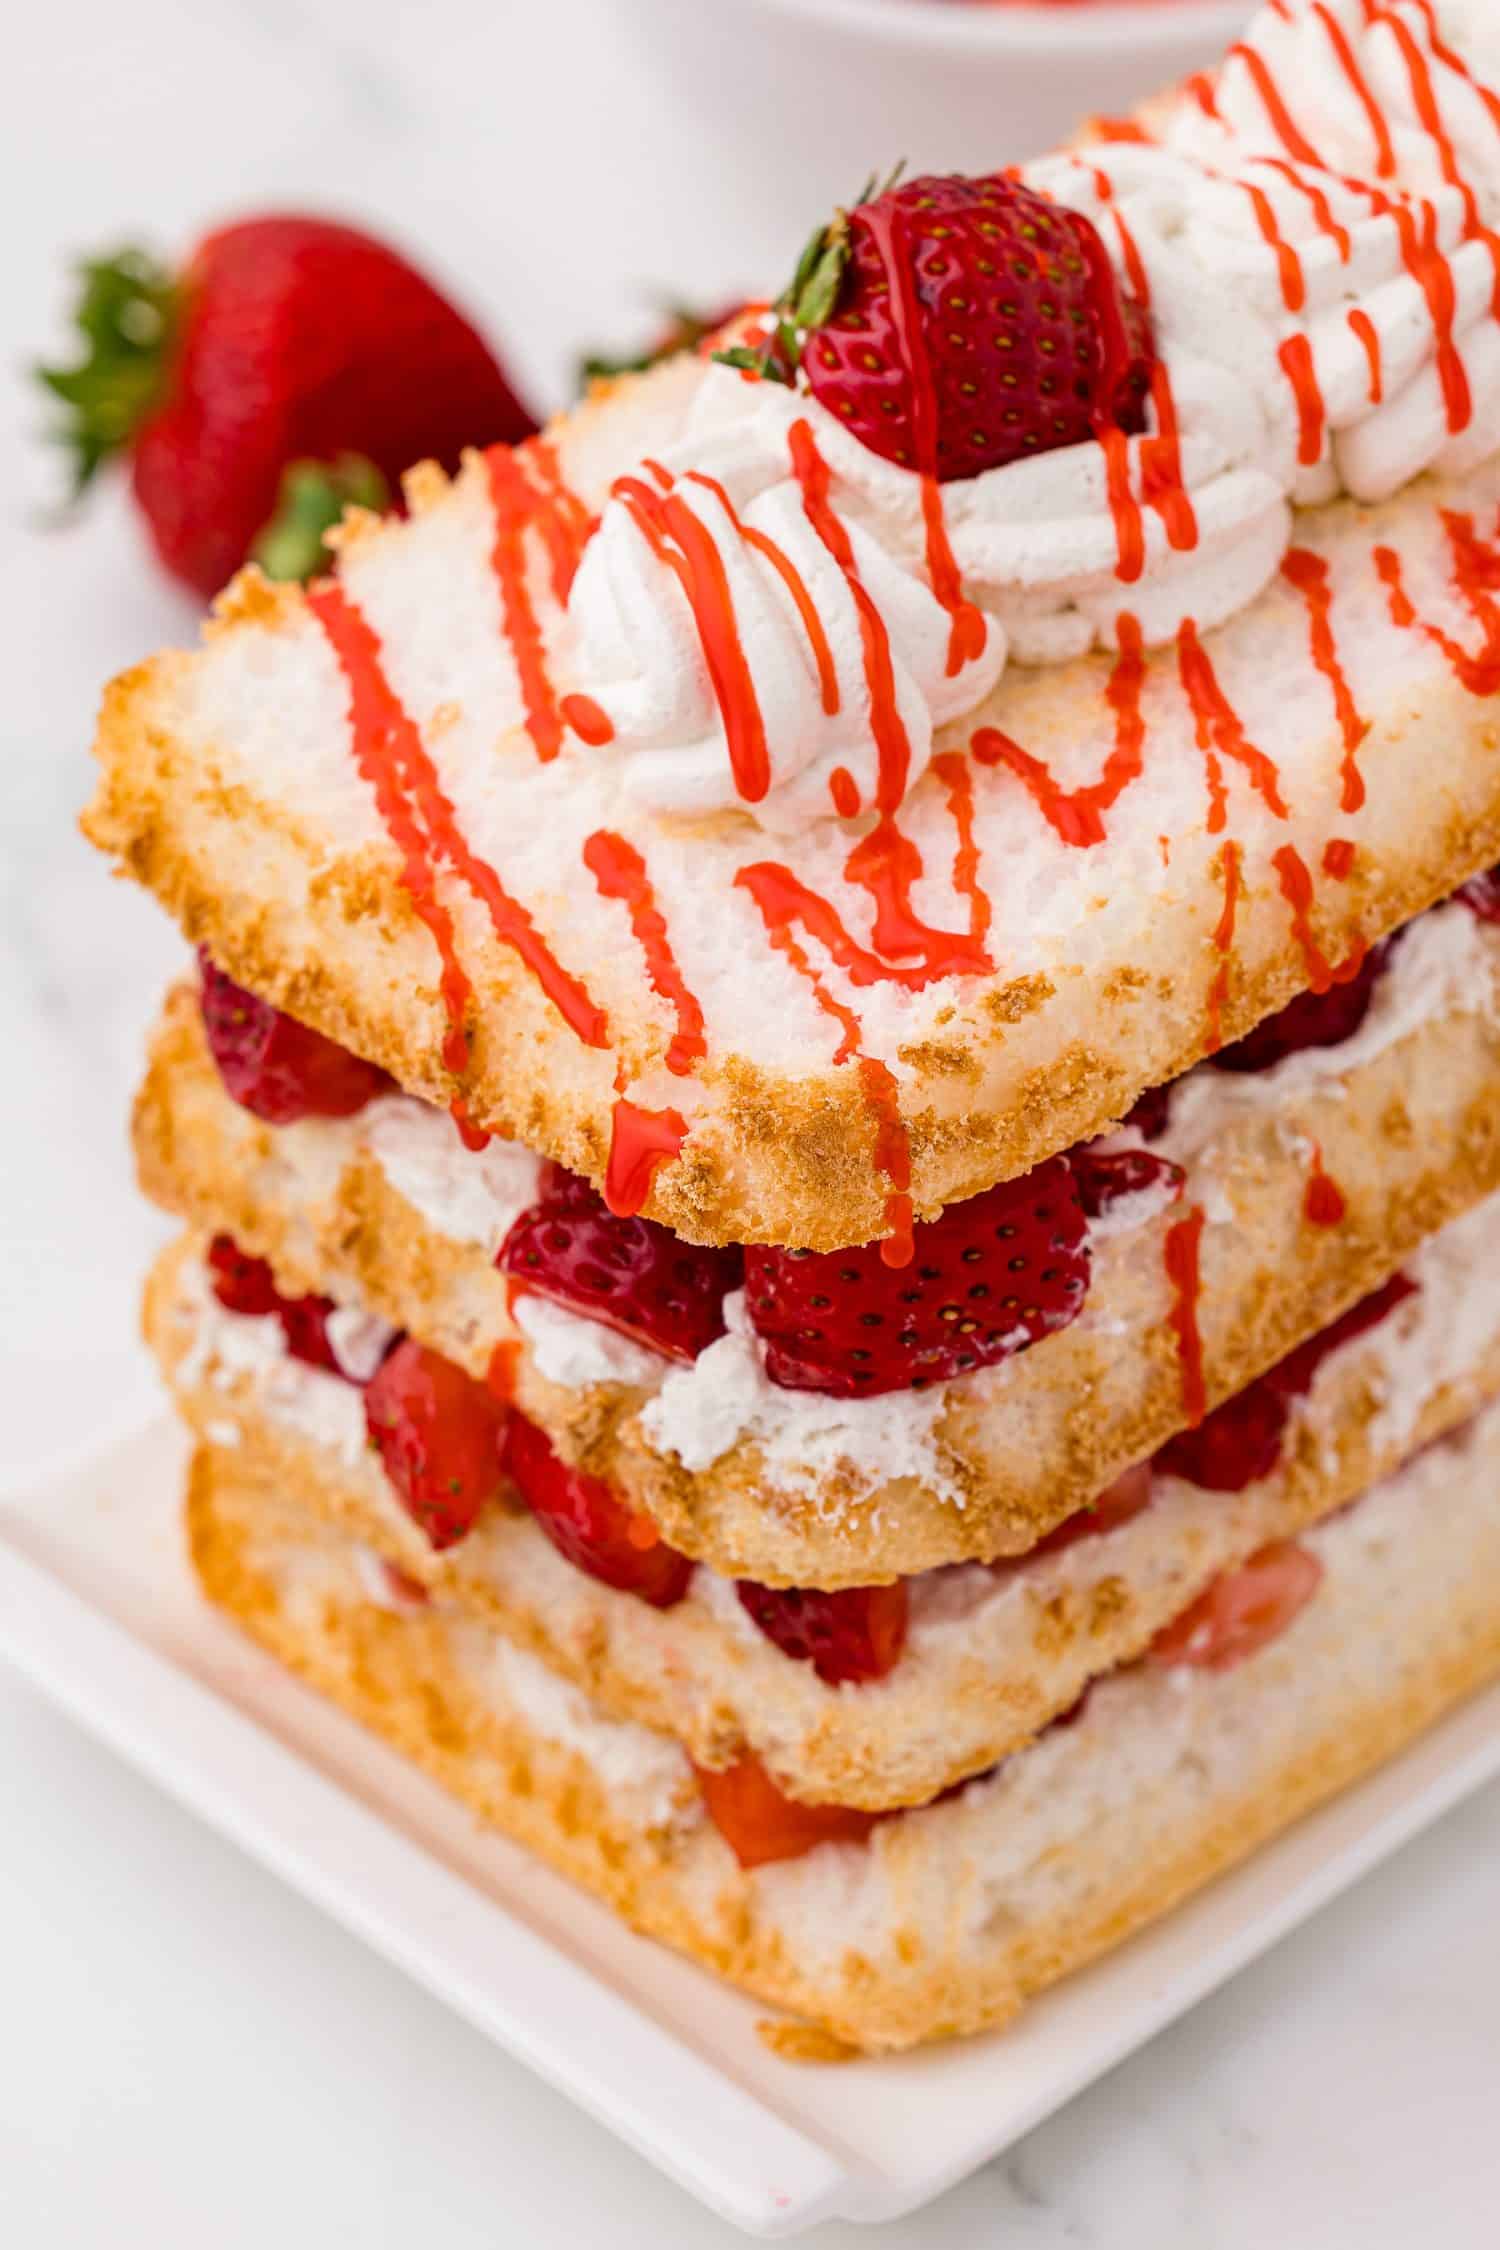 Layered angel food cake mix, drizzled with strawberry syrup.